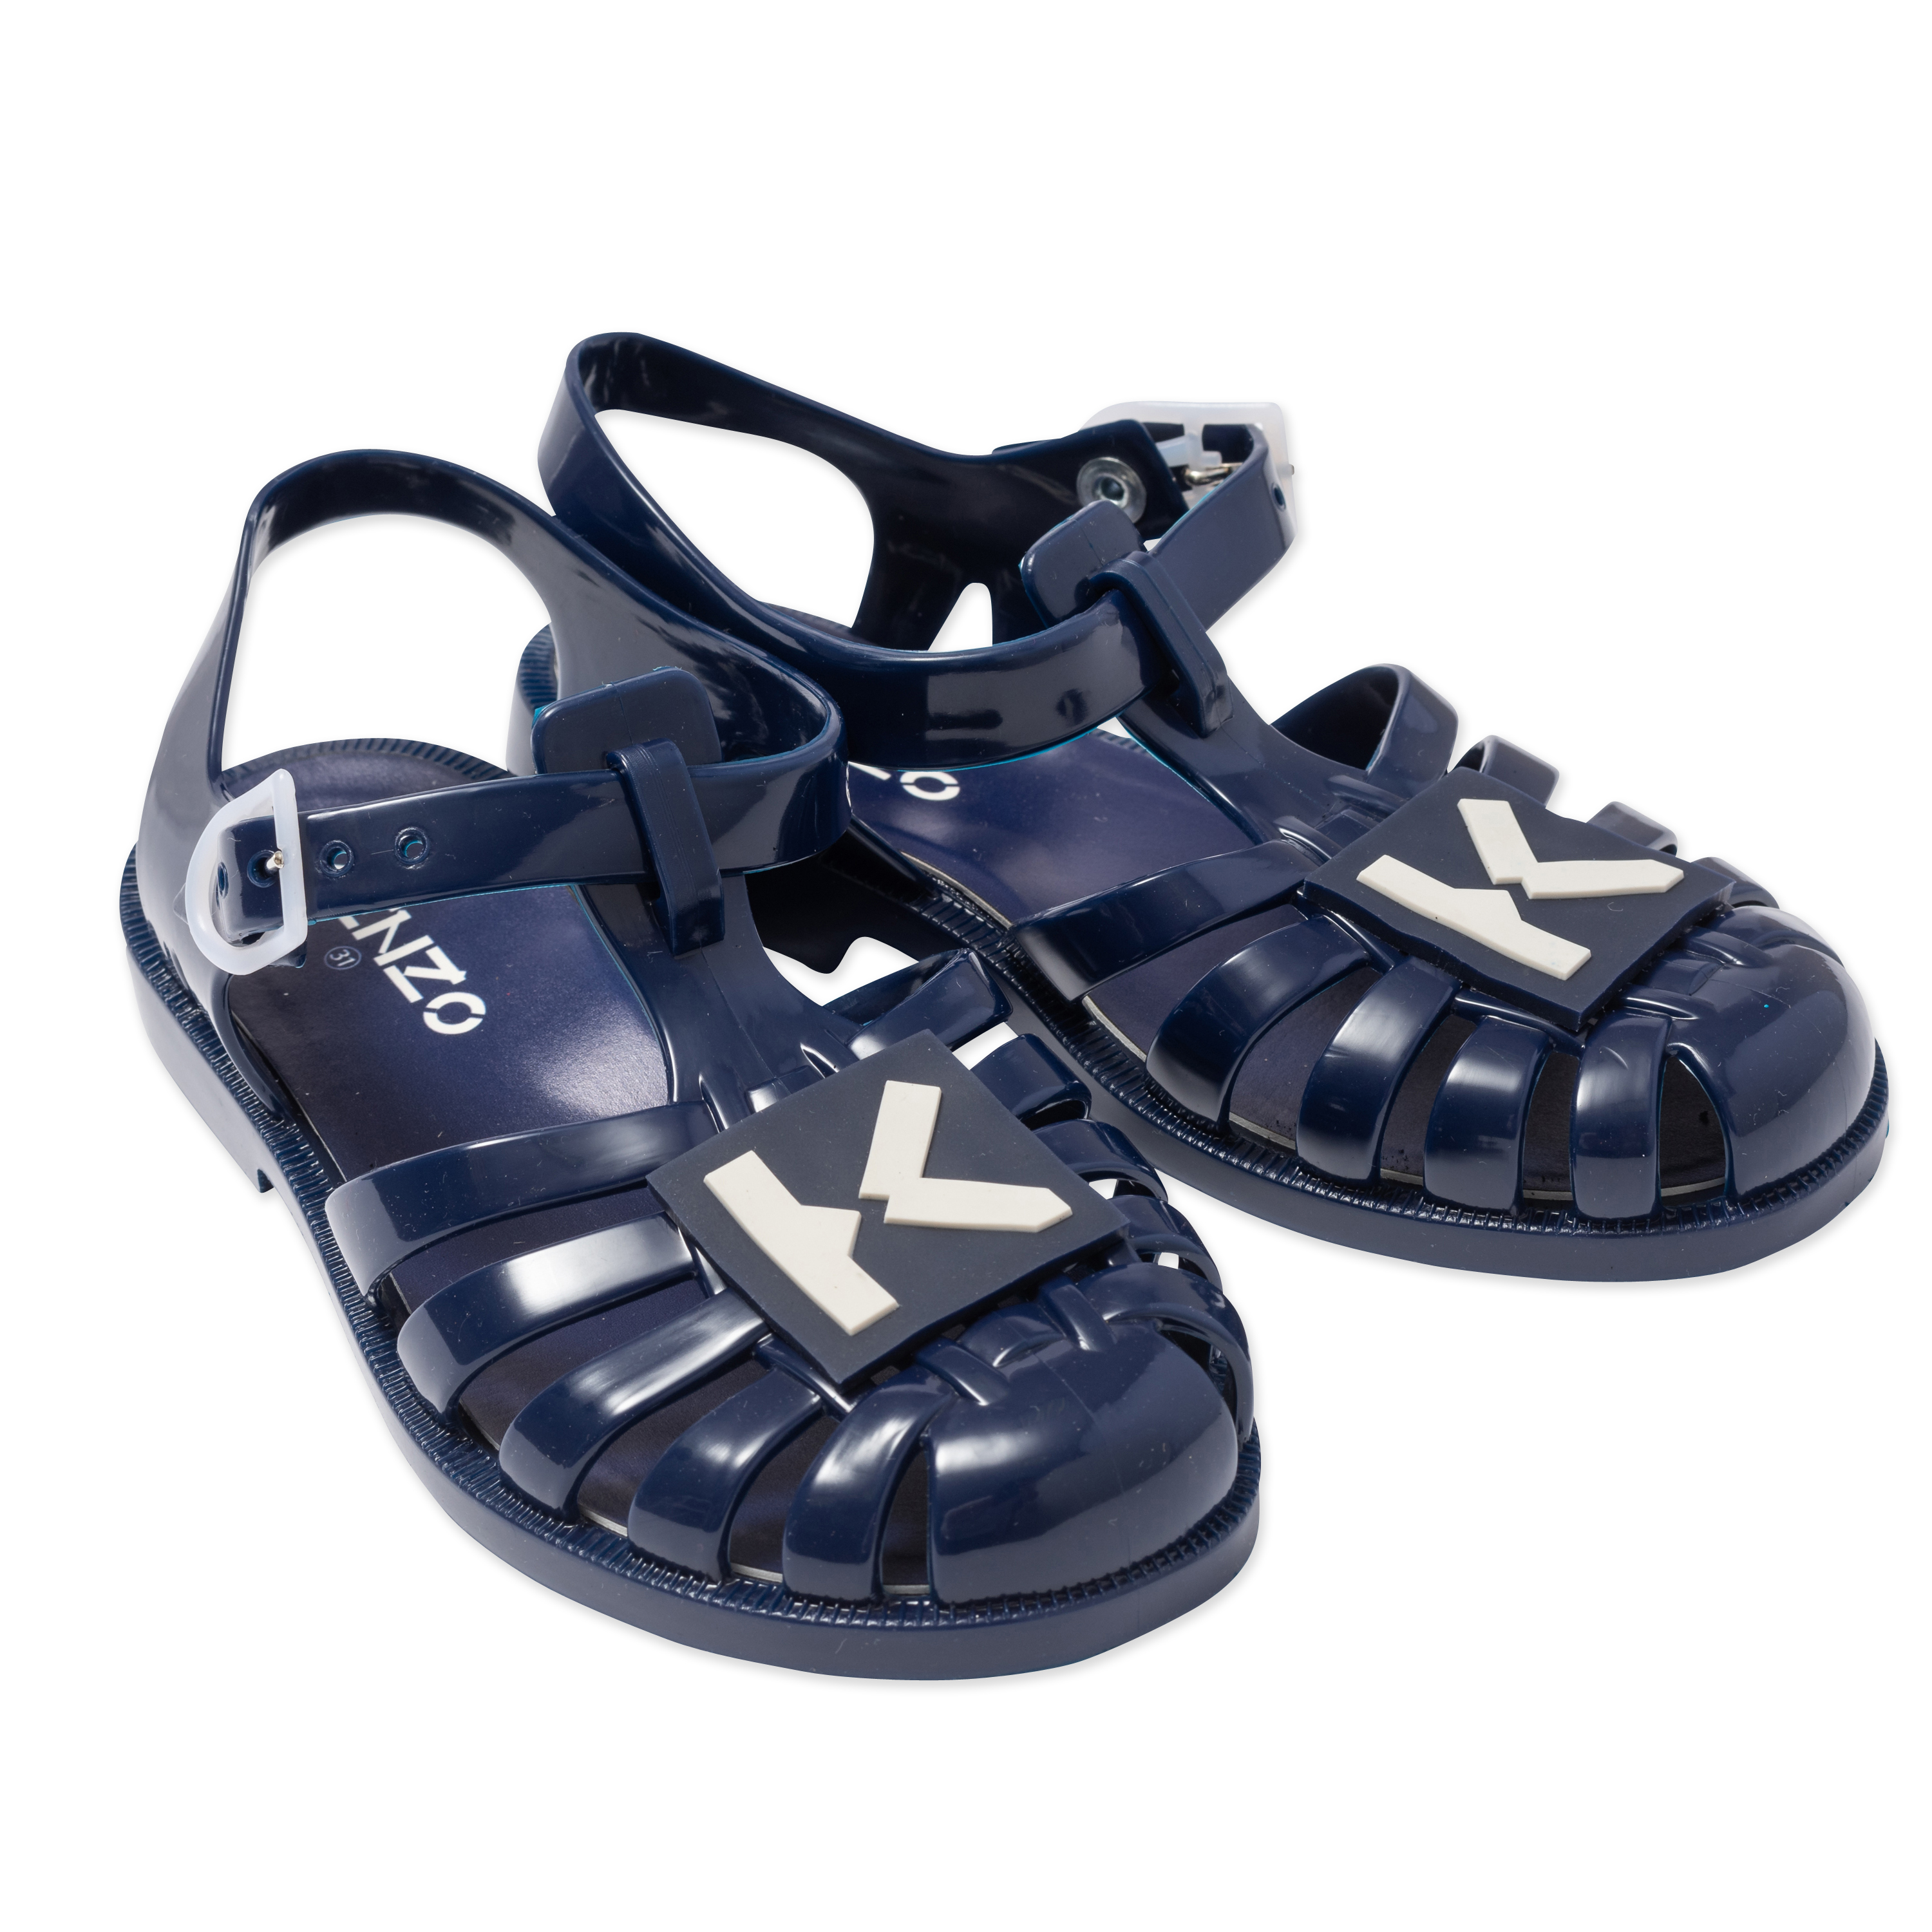 Buckled jelly sandals KENZO KIDS for UNISEX